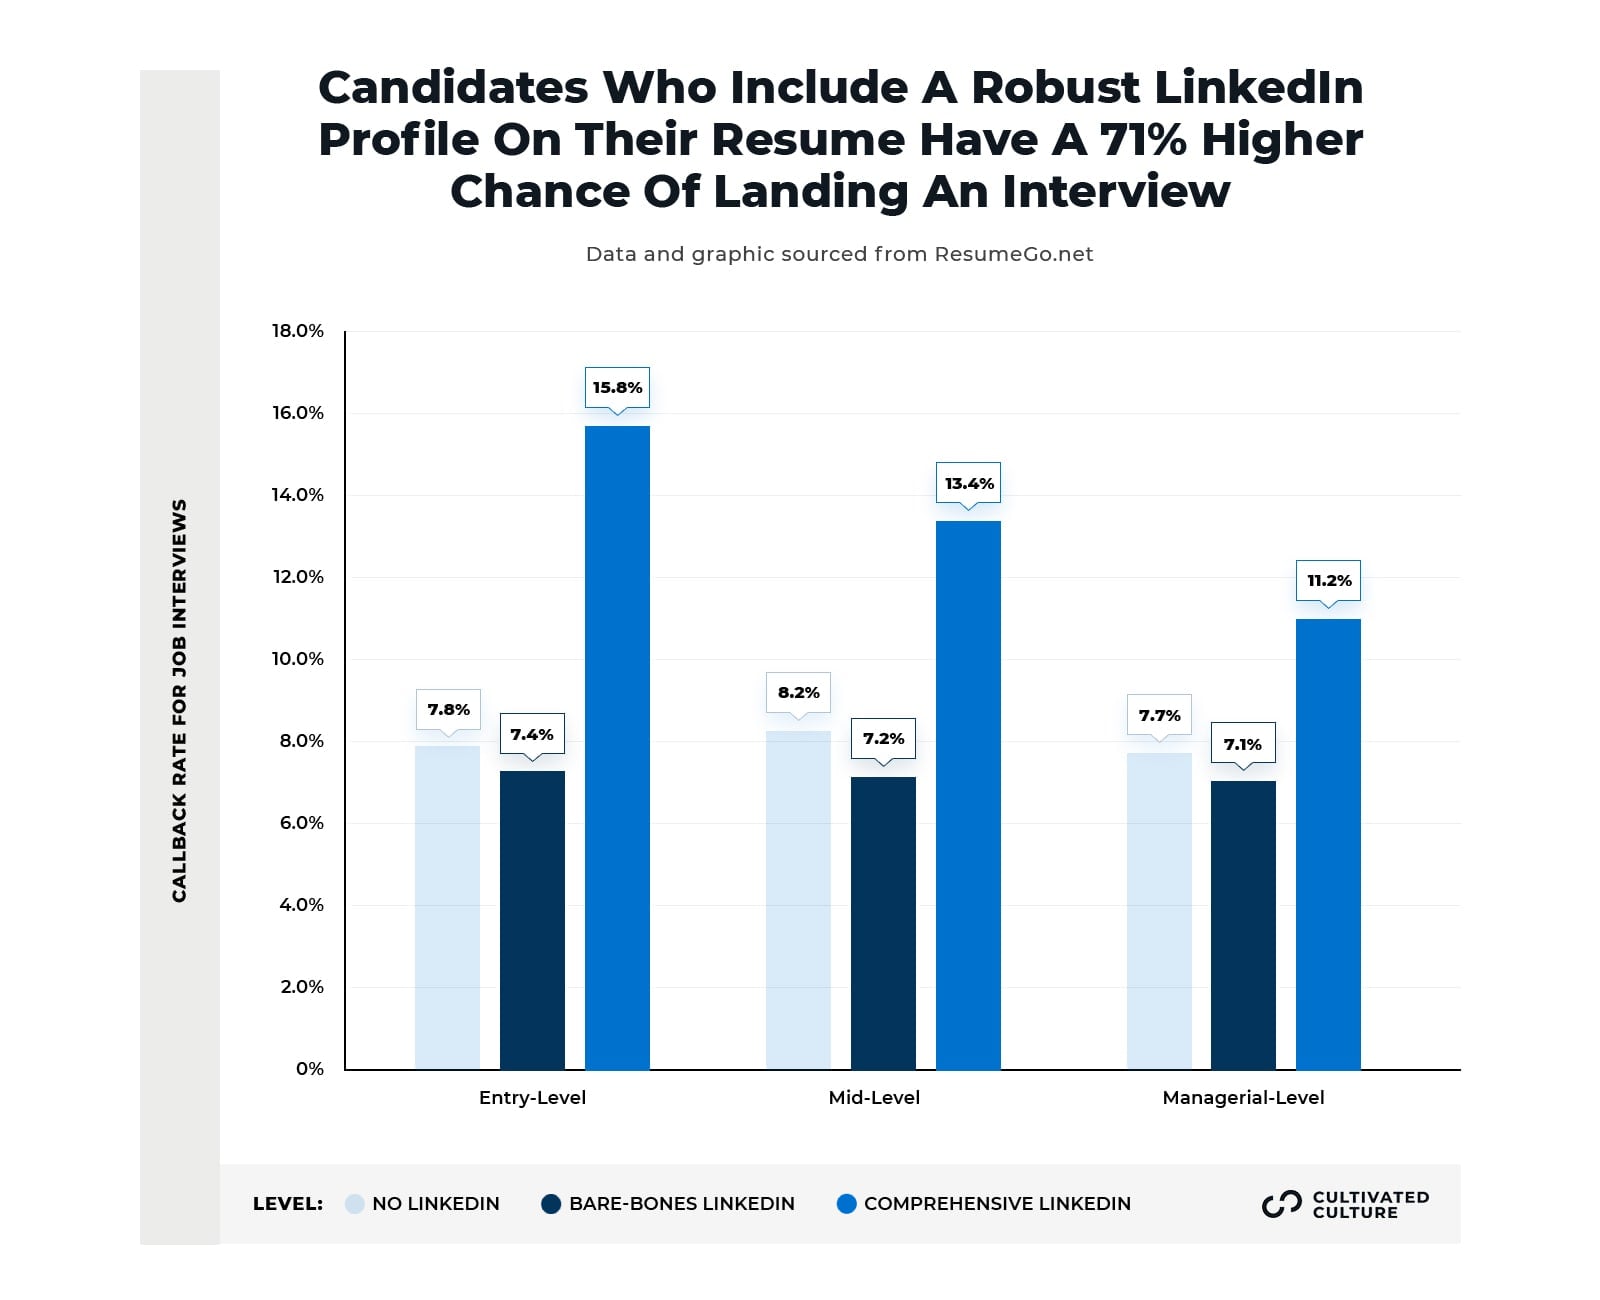 Callback Rates For LinkedIn Profiles On Resumes - Cultivated Culture